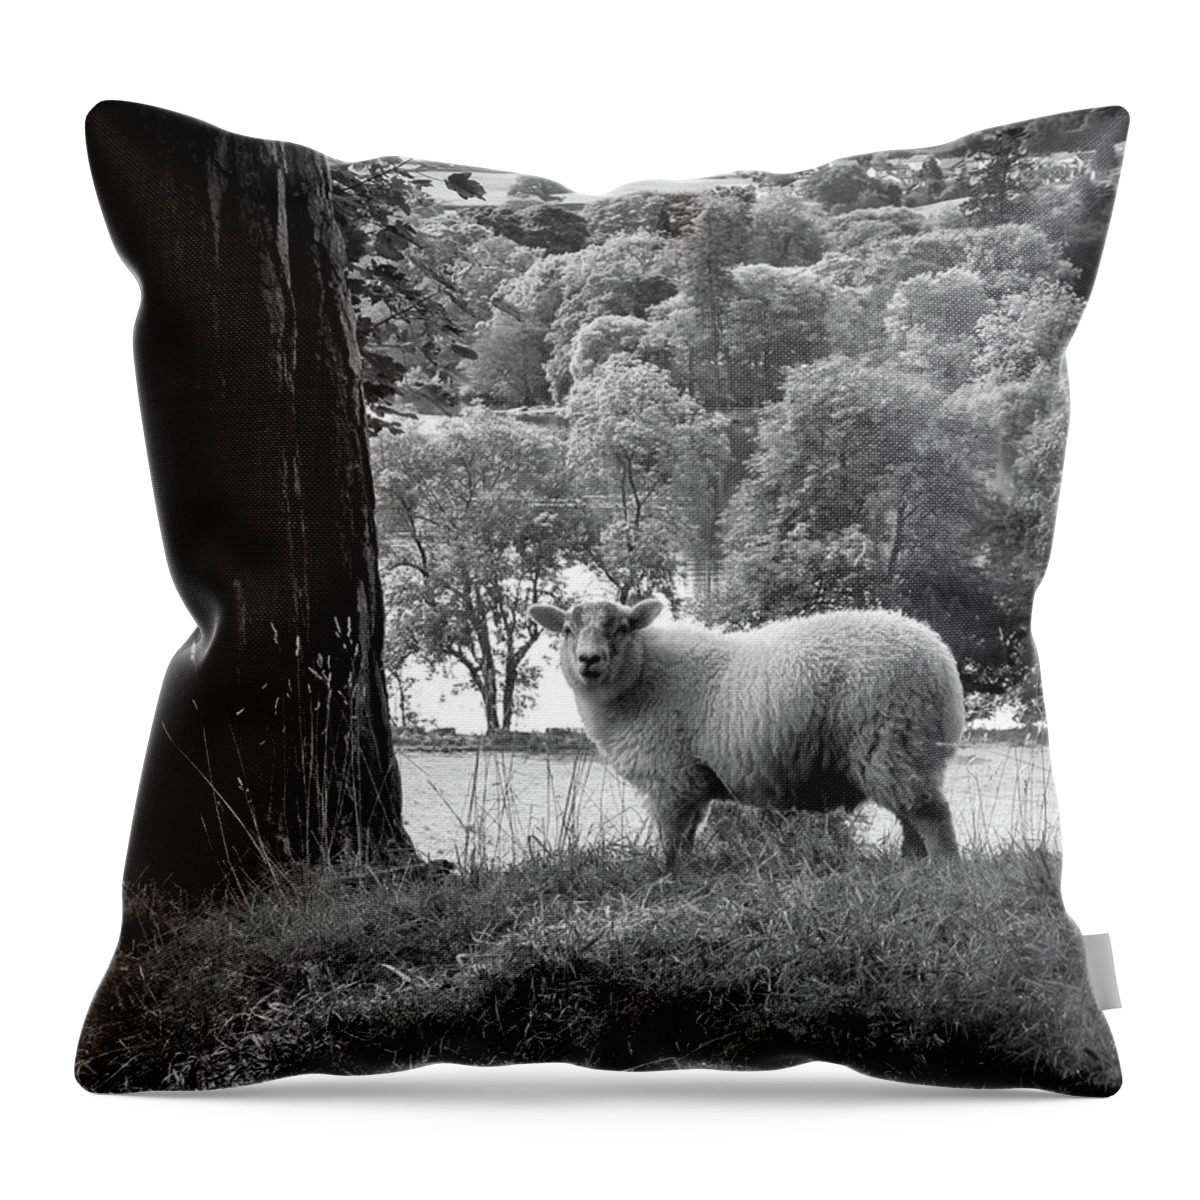 Animals Throw Pillow featuring the photograph Lake District sheep posing for the camera by Seeables Visual Arts